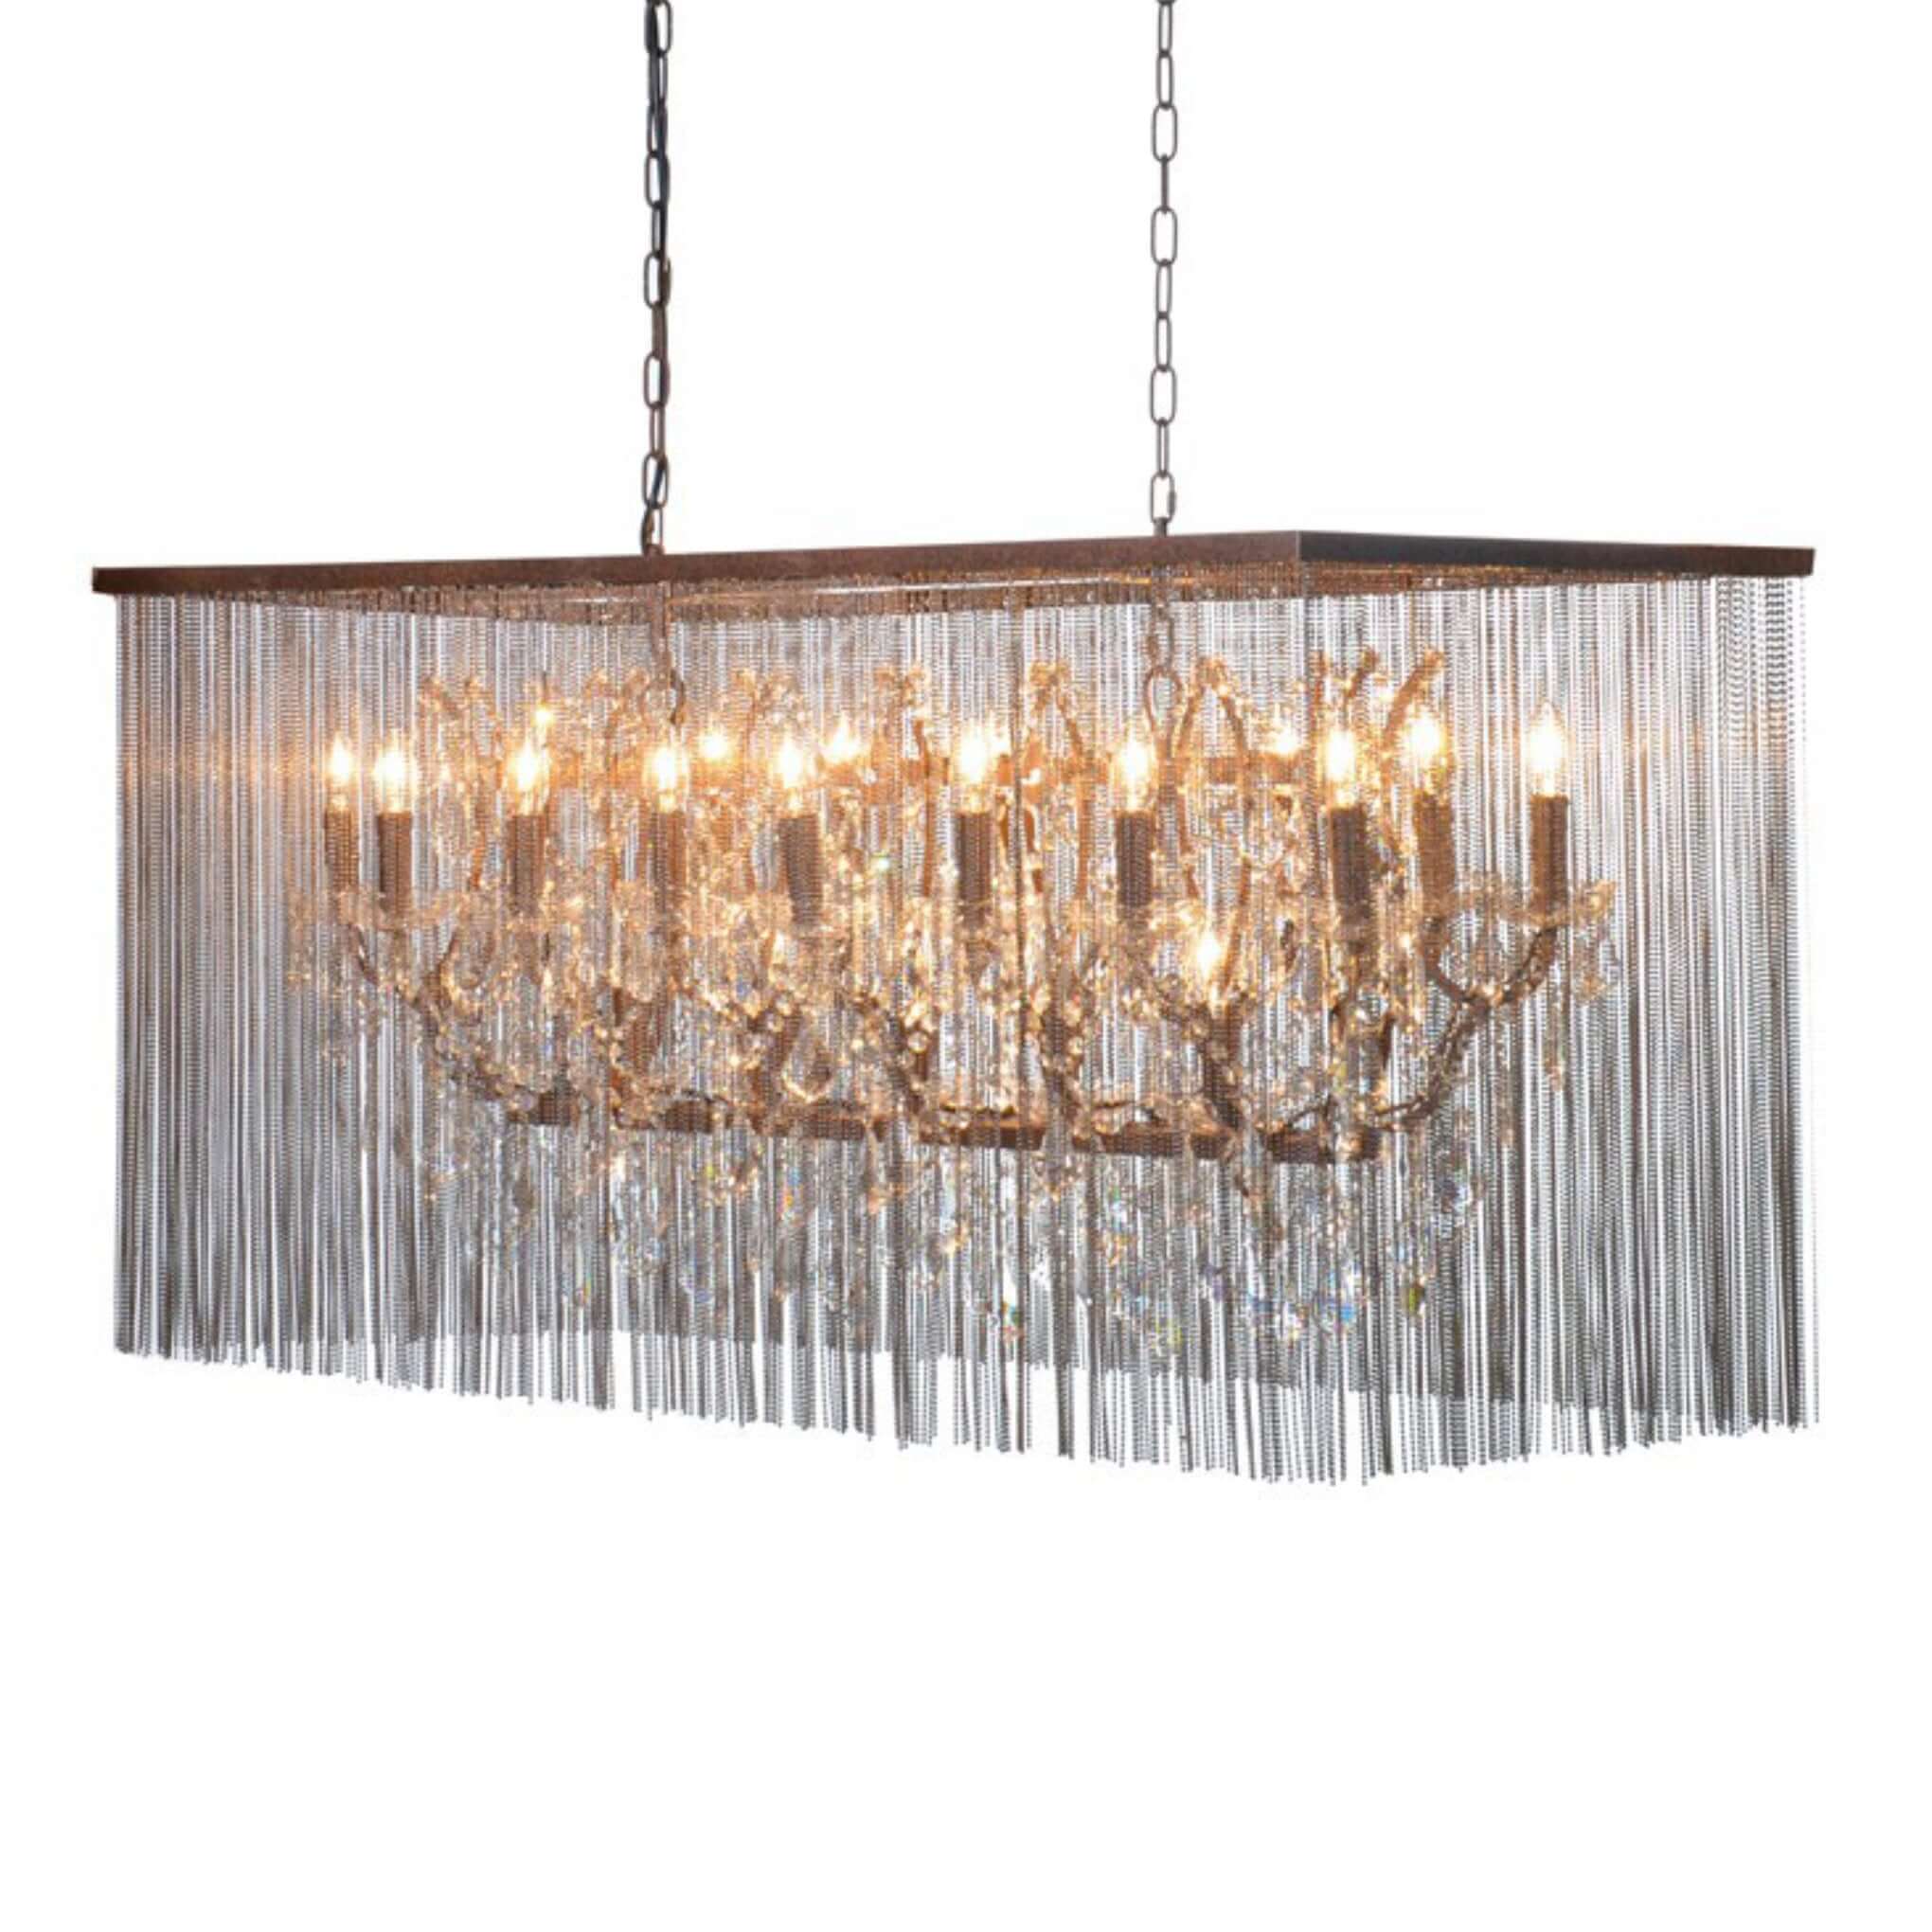 Sol Linear Chandelier - 21 Light - escapologyhome.co.uk